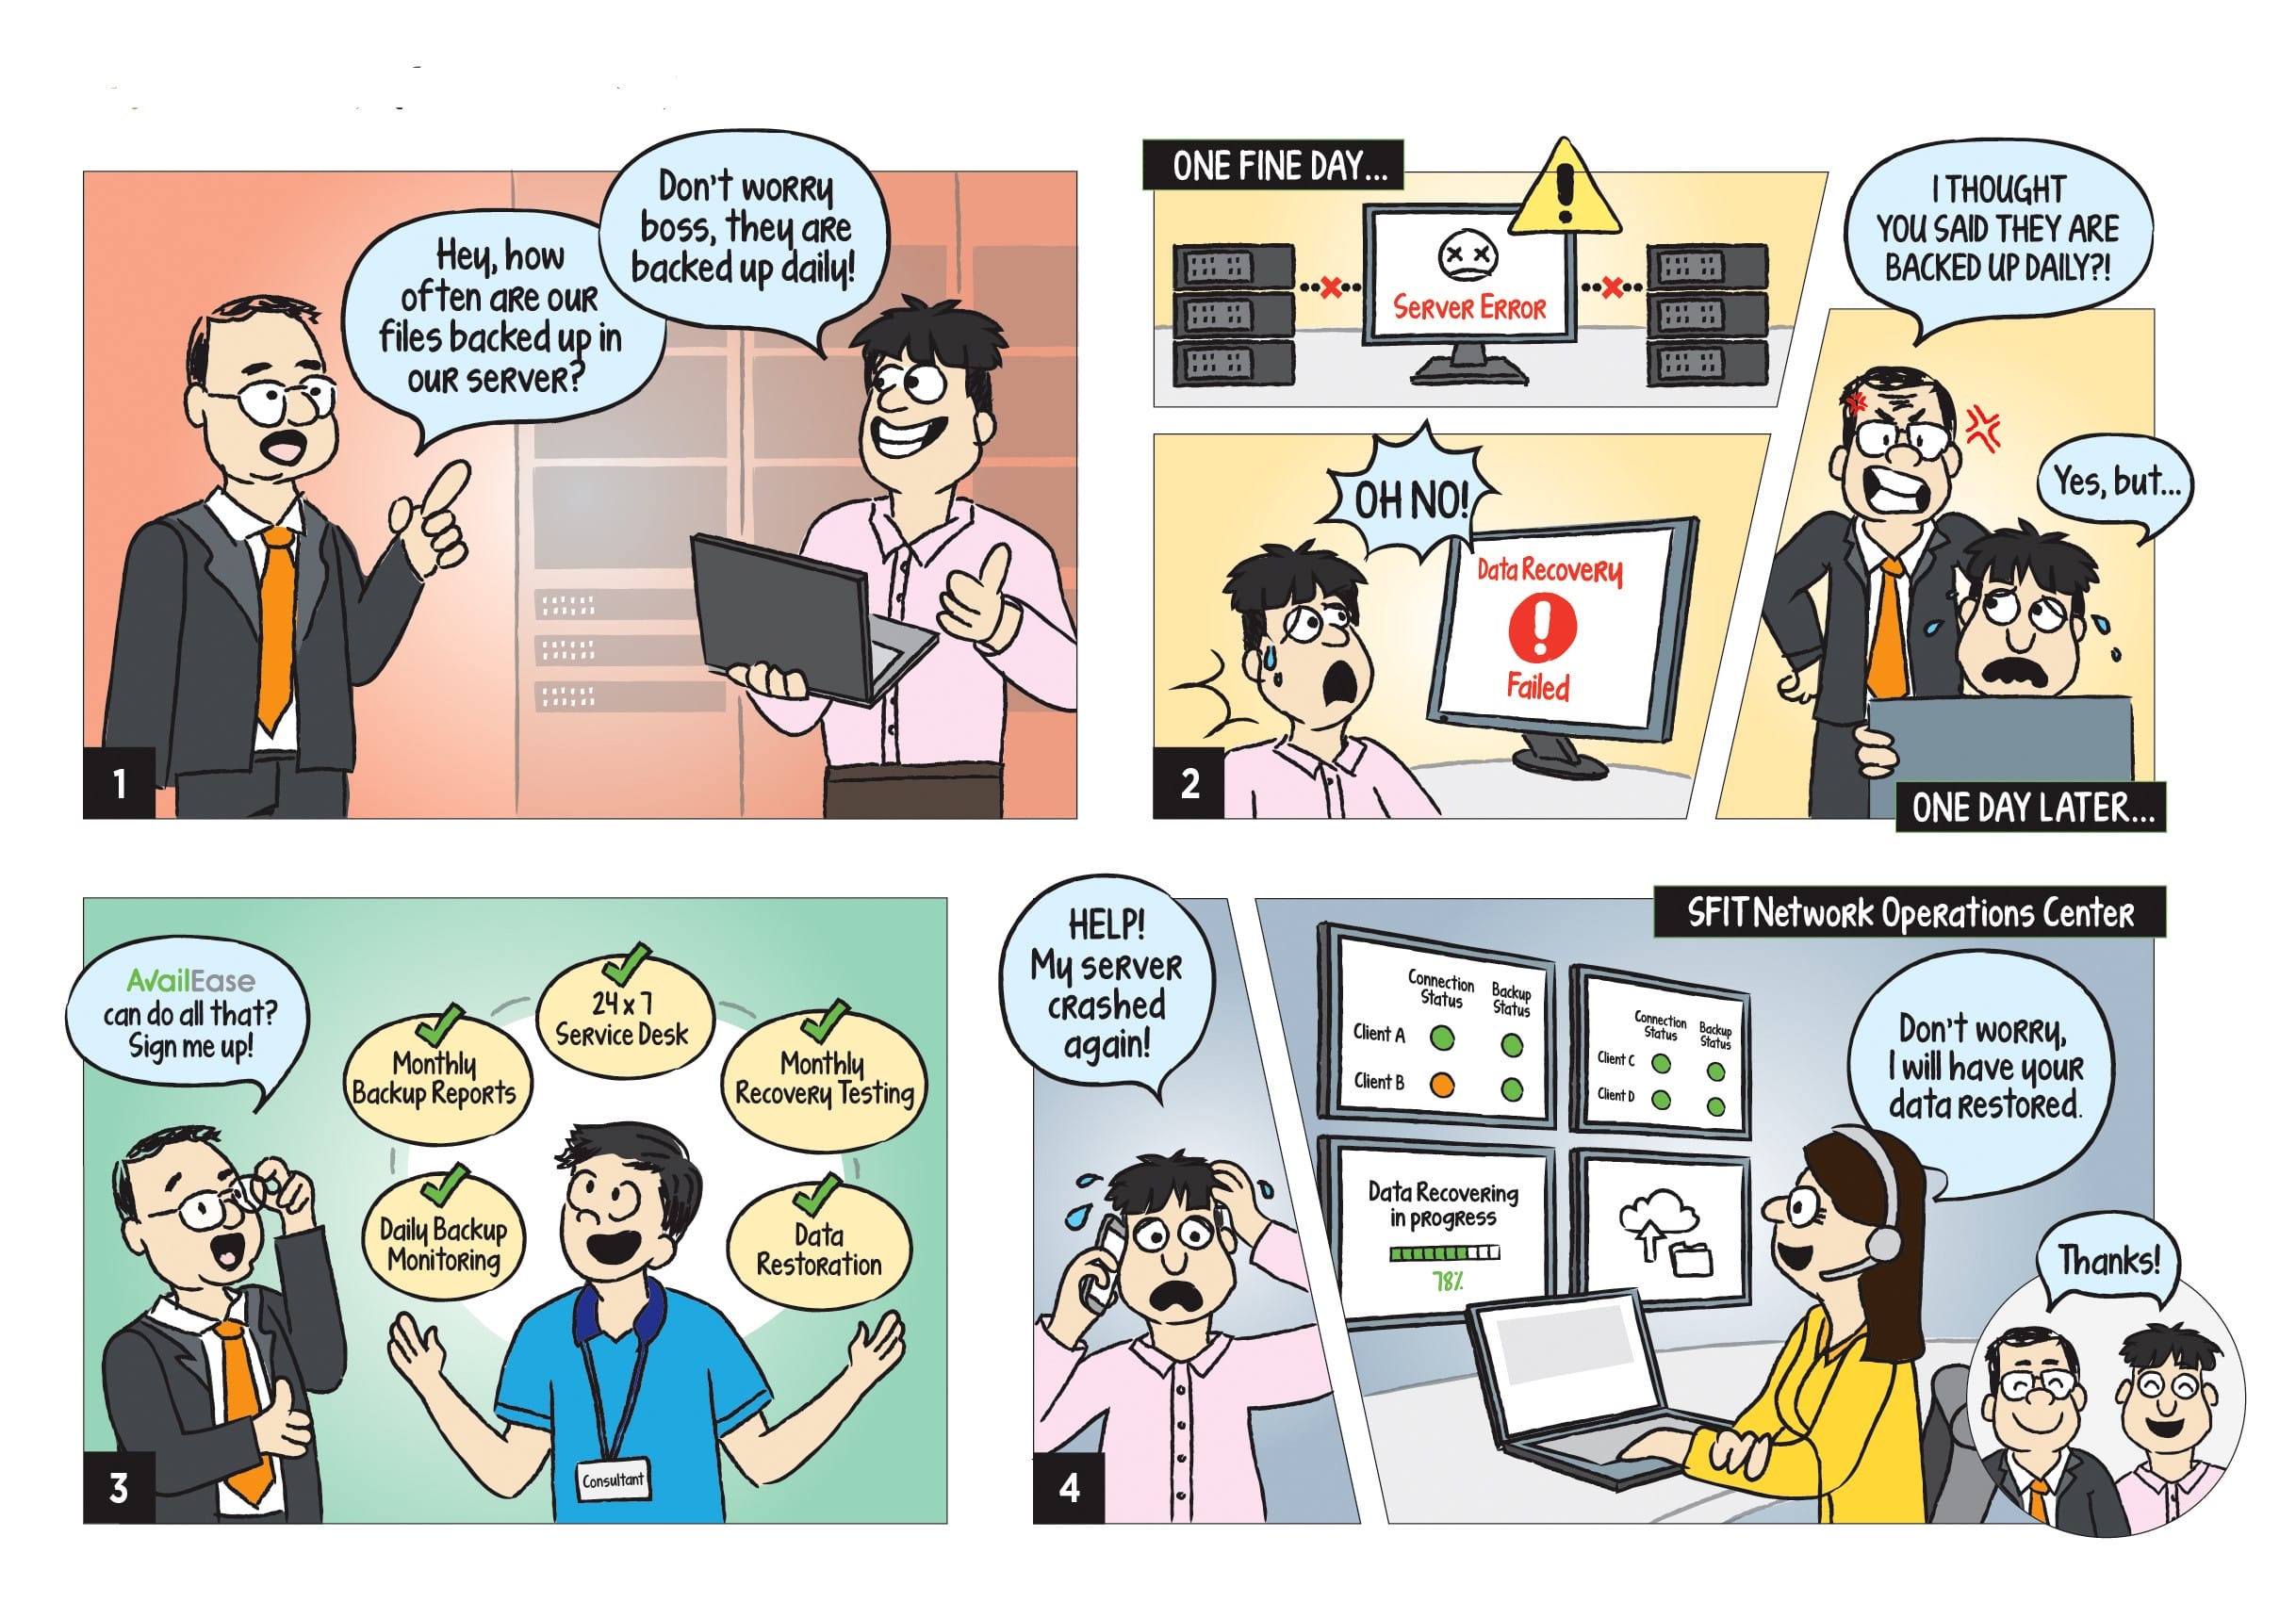 Comic strip illustrating data recovery failure caused by server error and how managed backup services can help you to restore the data